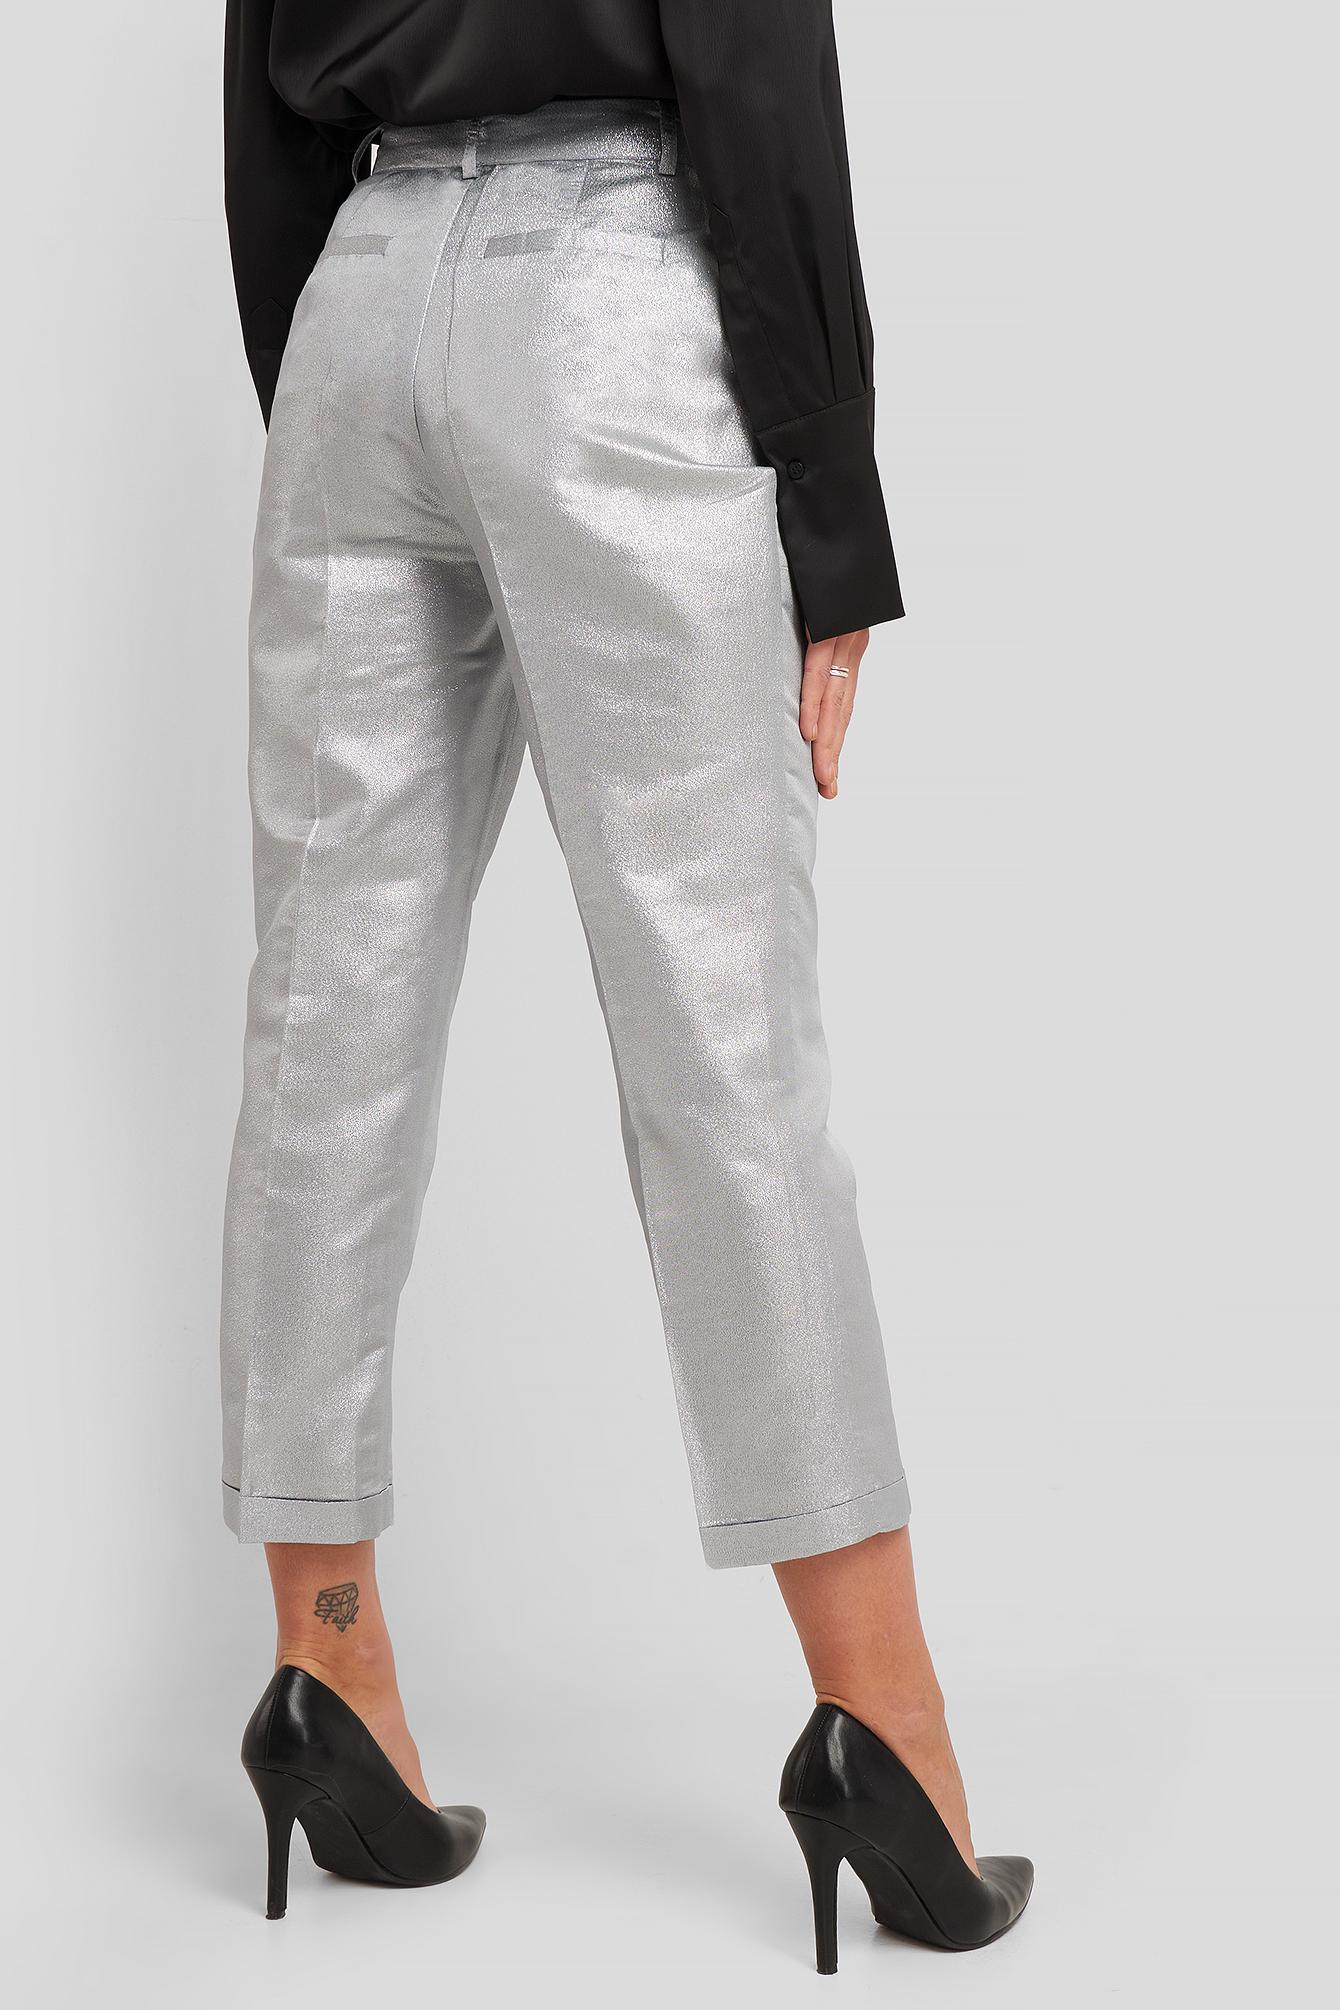 Metallic Womens Clothing Trousers Chloé Synthetic Pants in Silver Slacks and Chinos Capri and cropped trousers 